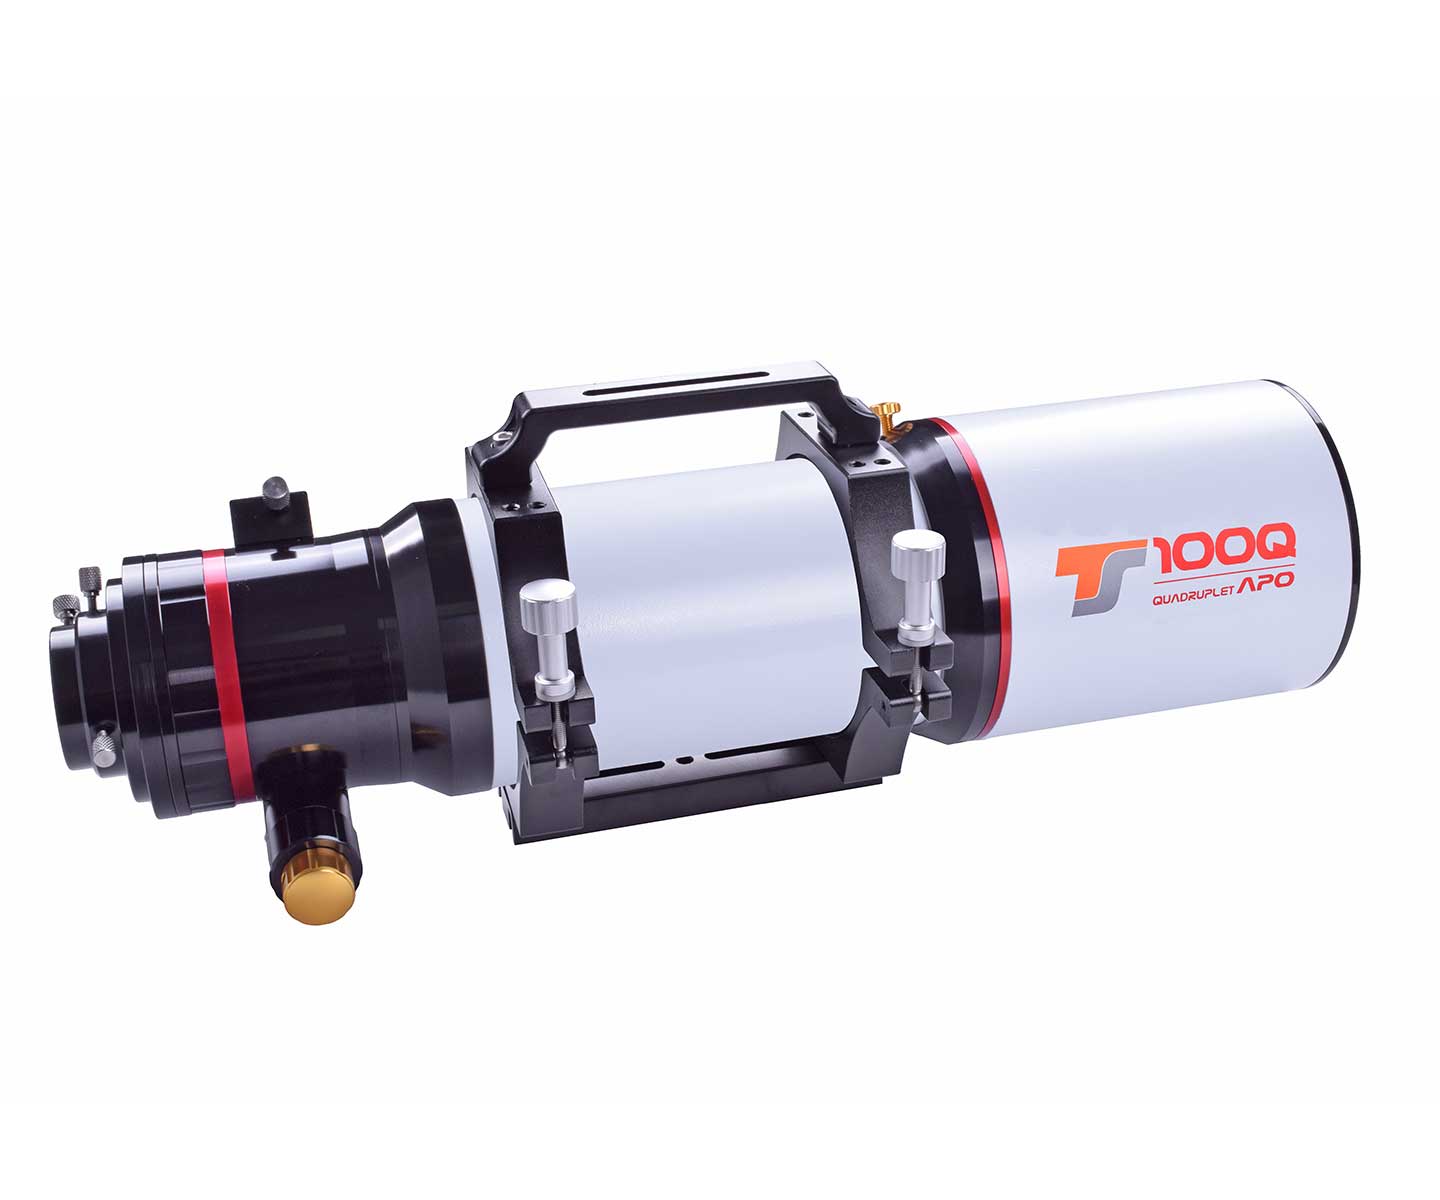  The TSQ-100ED apochromat for astrophotography offers a gigantic fully corrected and illuminated image field. [EN] 